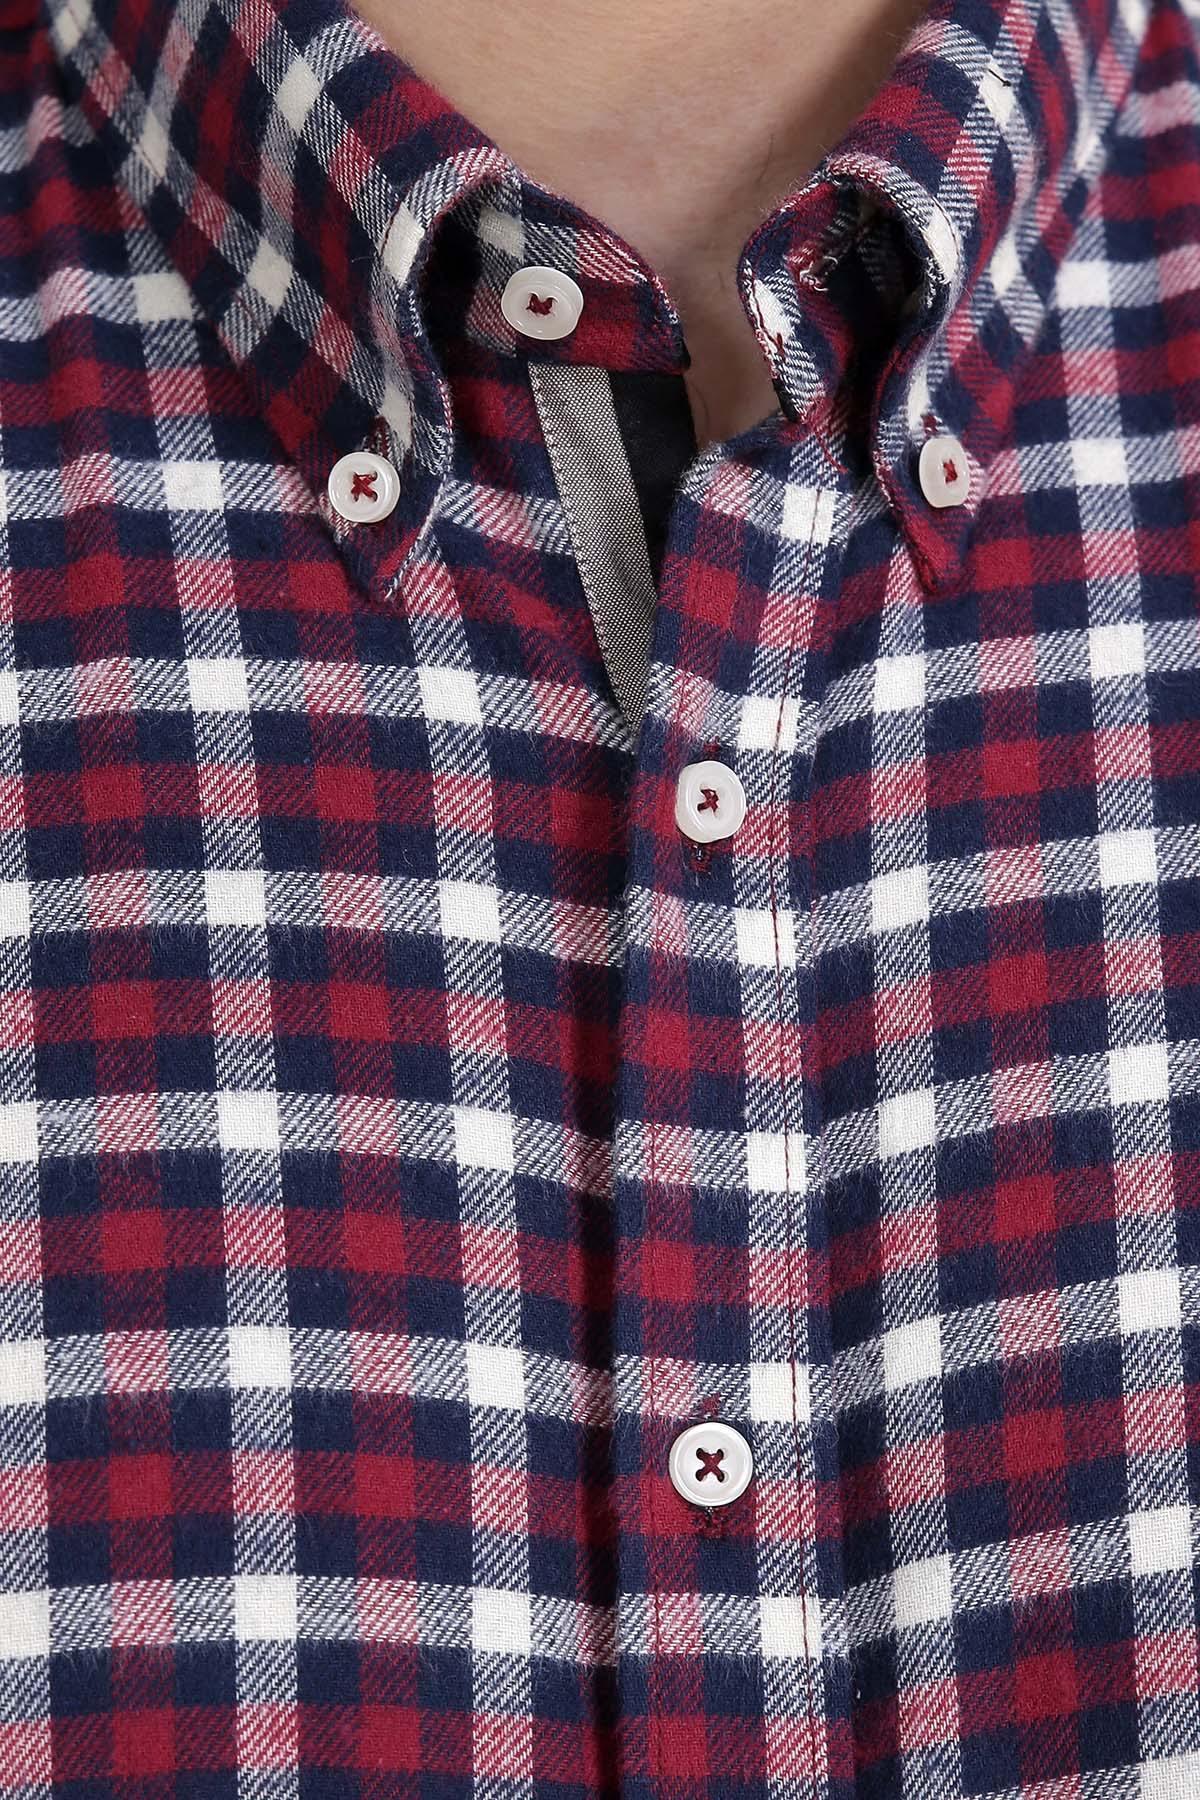 SEMI FORMAL SHIRTS BUTTON DOWN WINTER FULL SLEEVE MAROON NAVY at Charcoal Clothing